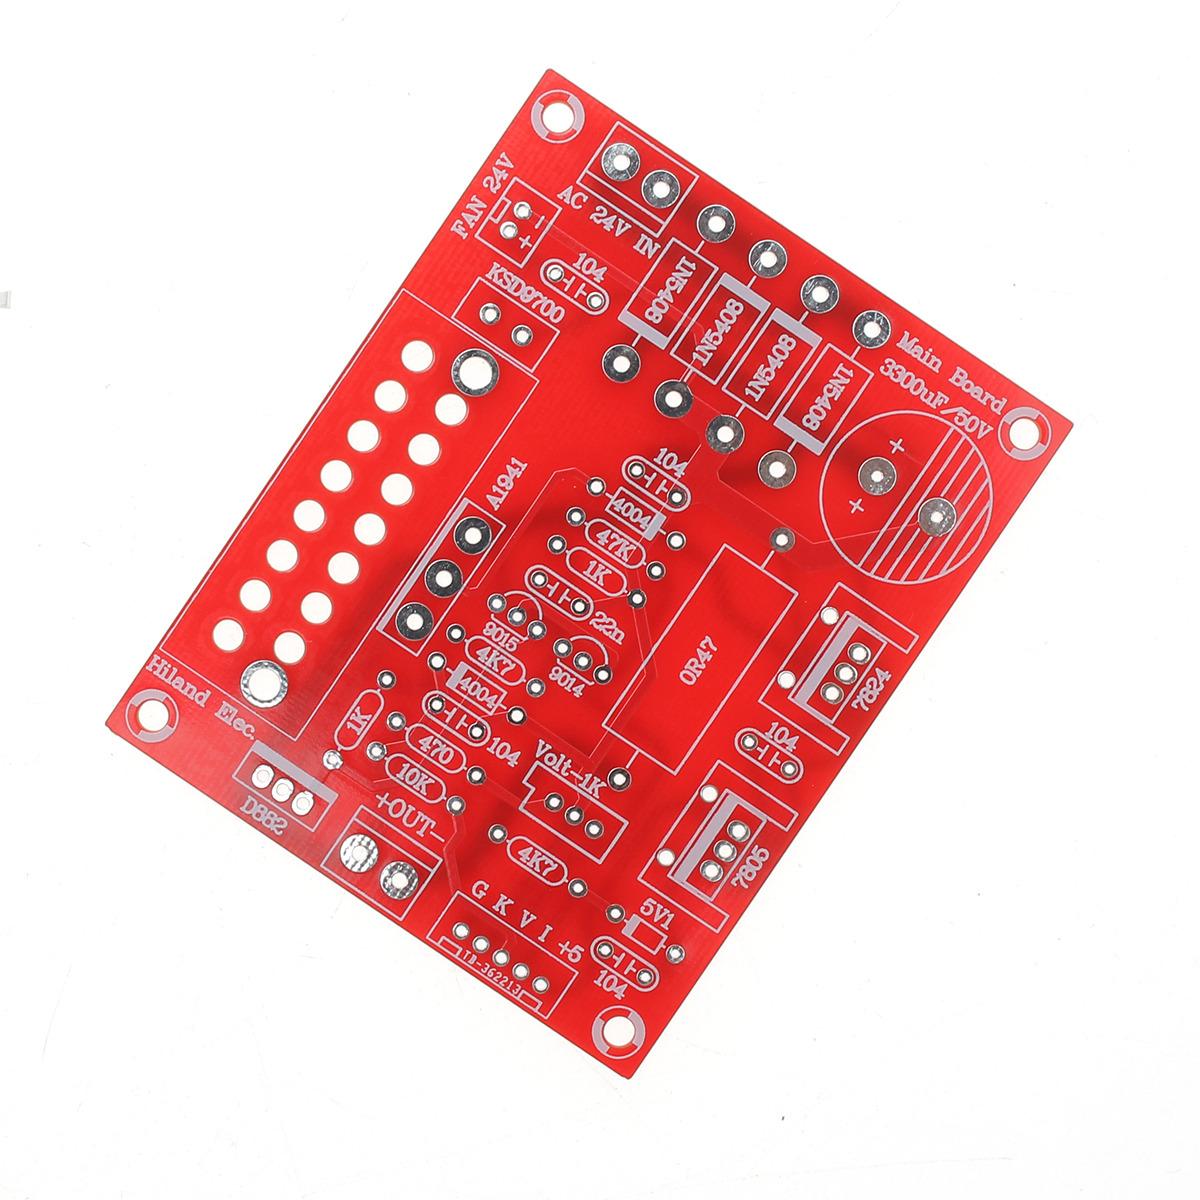 0-28V 0.01-2A Adjustable DC Regulated Power Supply Module DIY Kit Short Circuit Current Limiting Protection 19